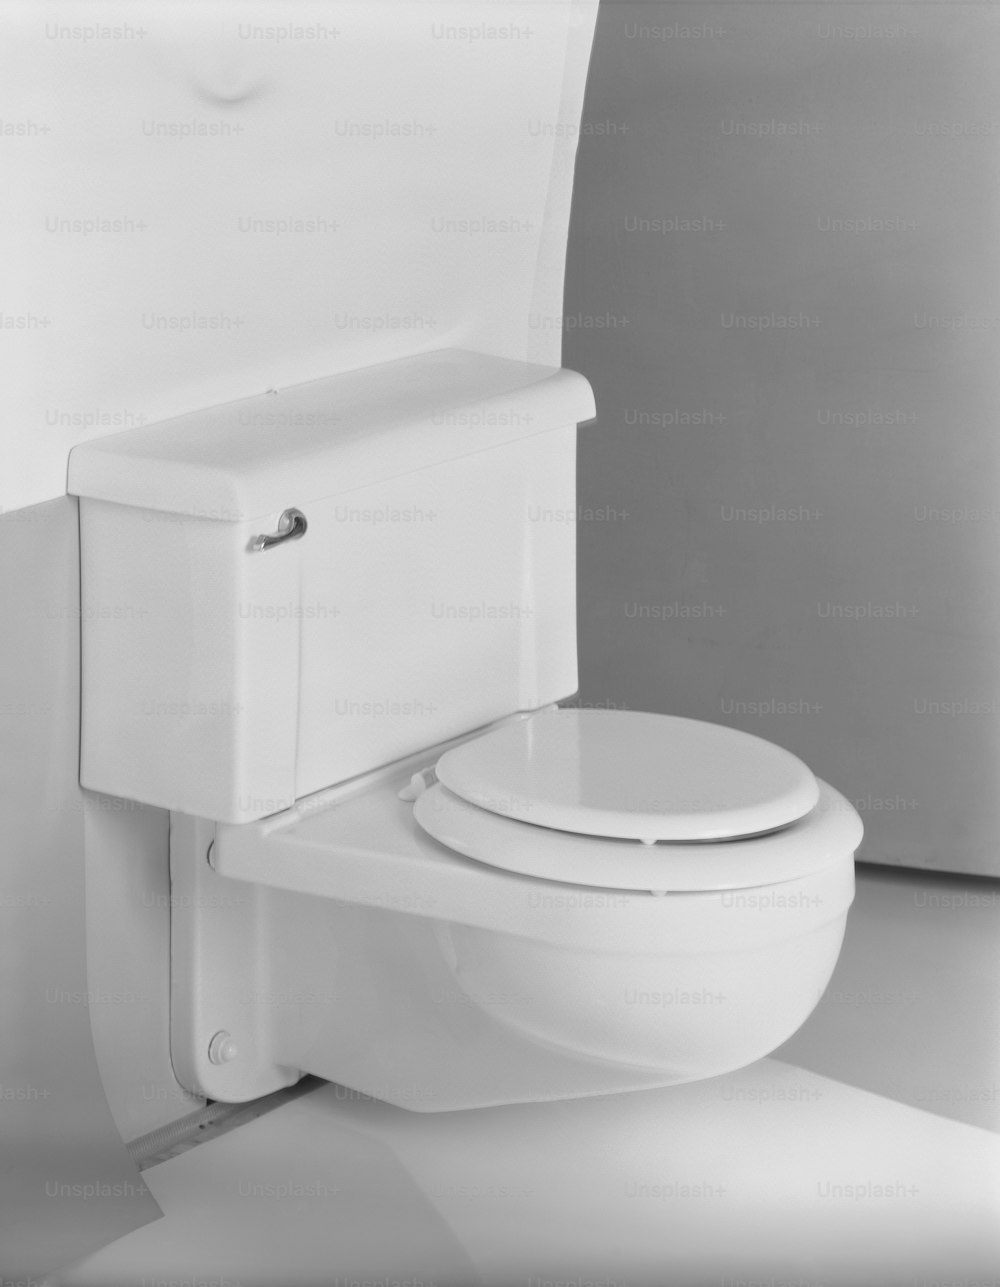 Toilet Bowl With Lid Open Stock Photo, Picture and Royalty Free Image.  Image 39379069.